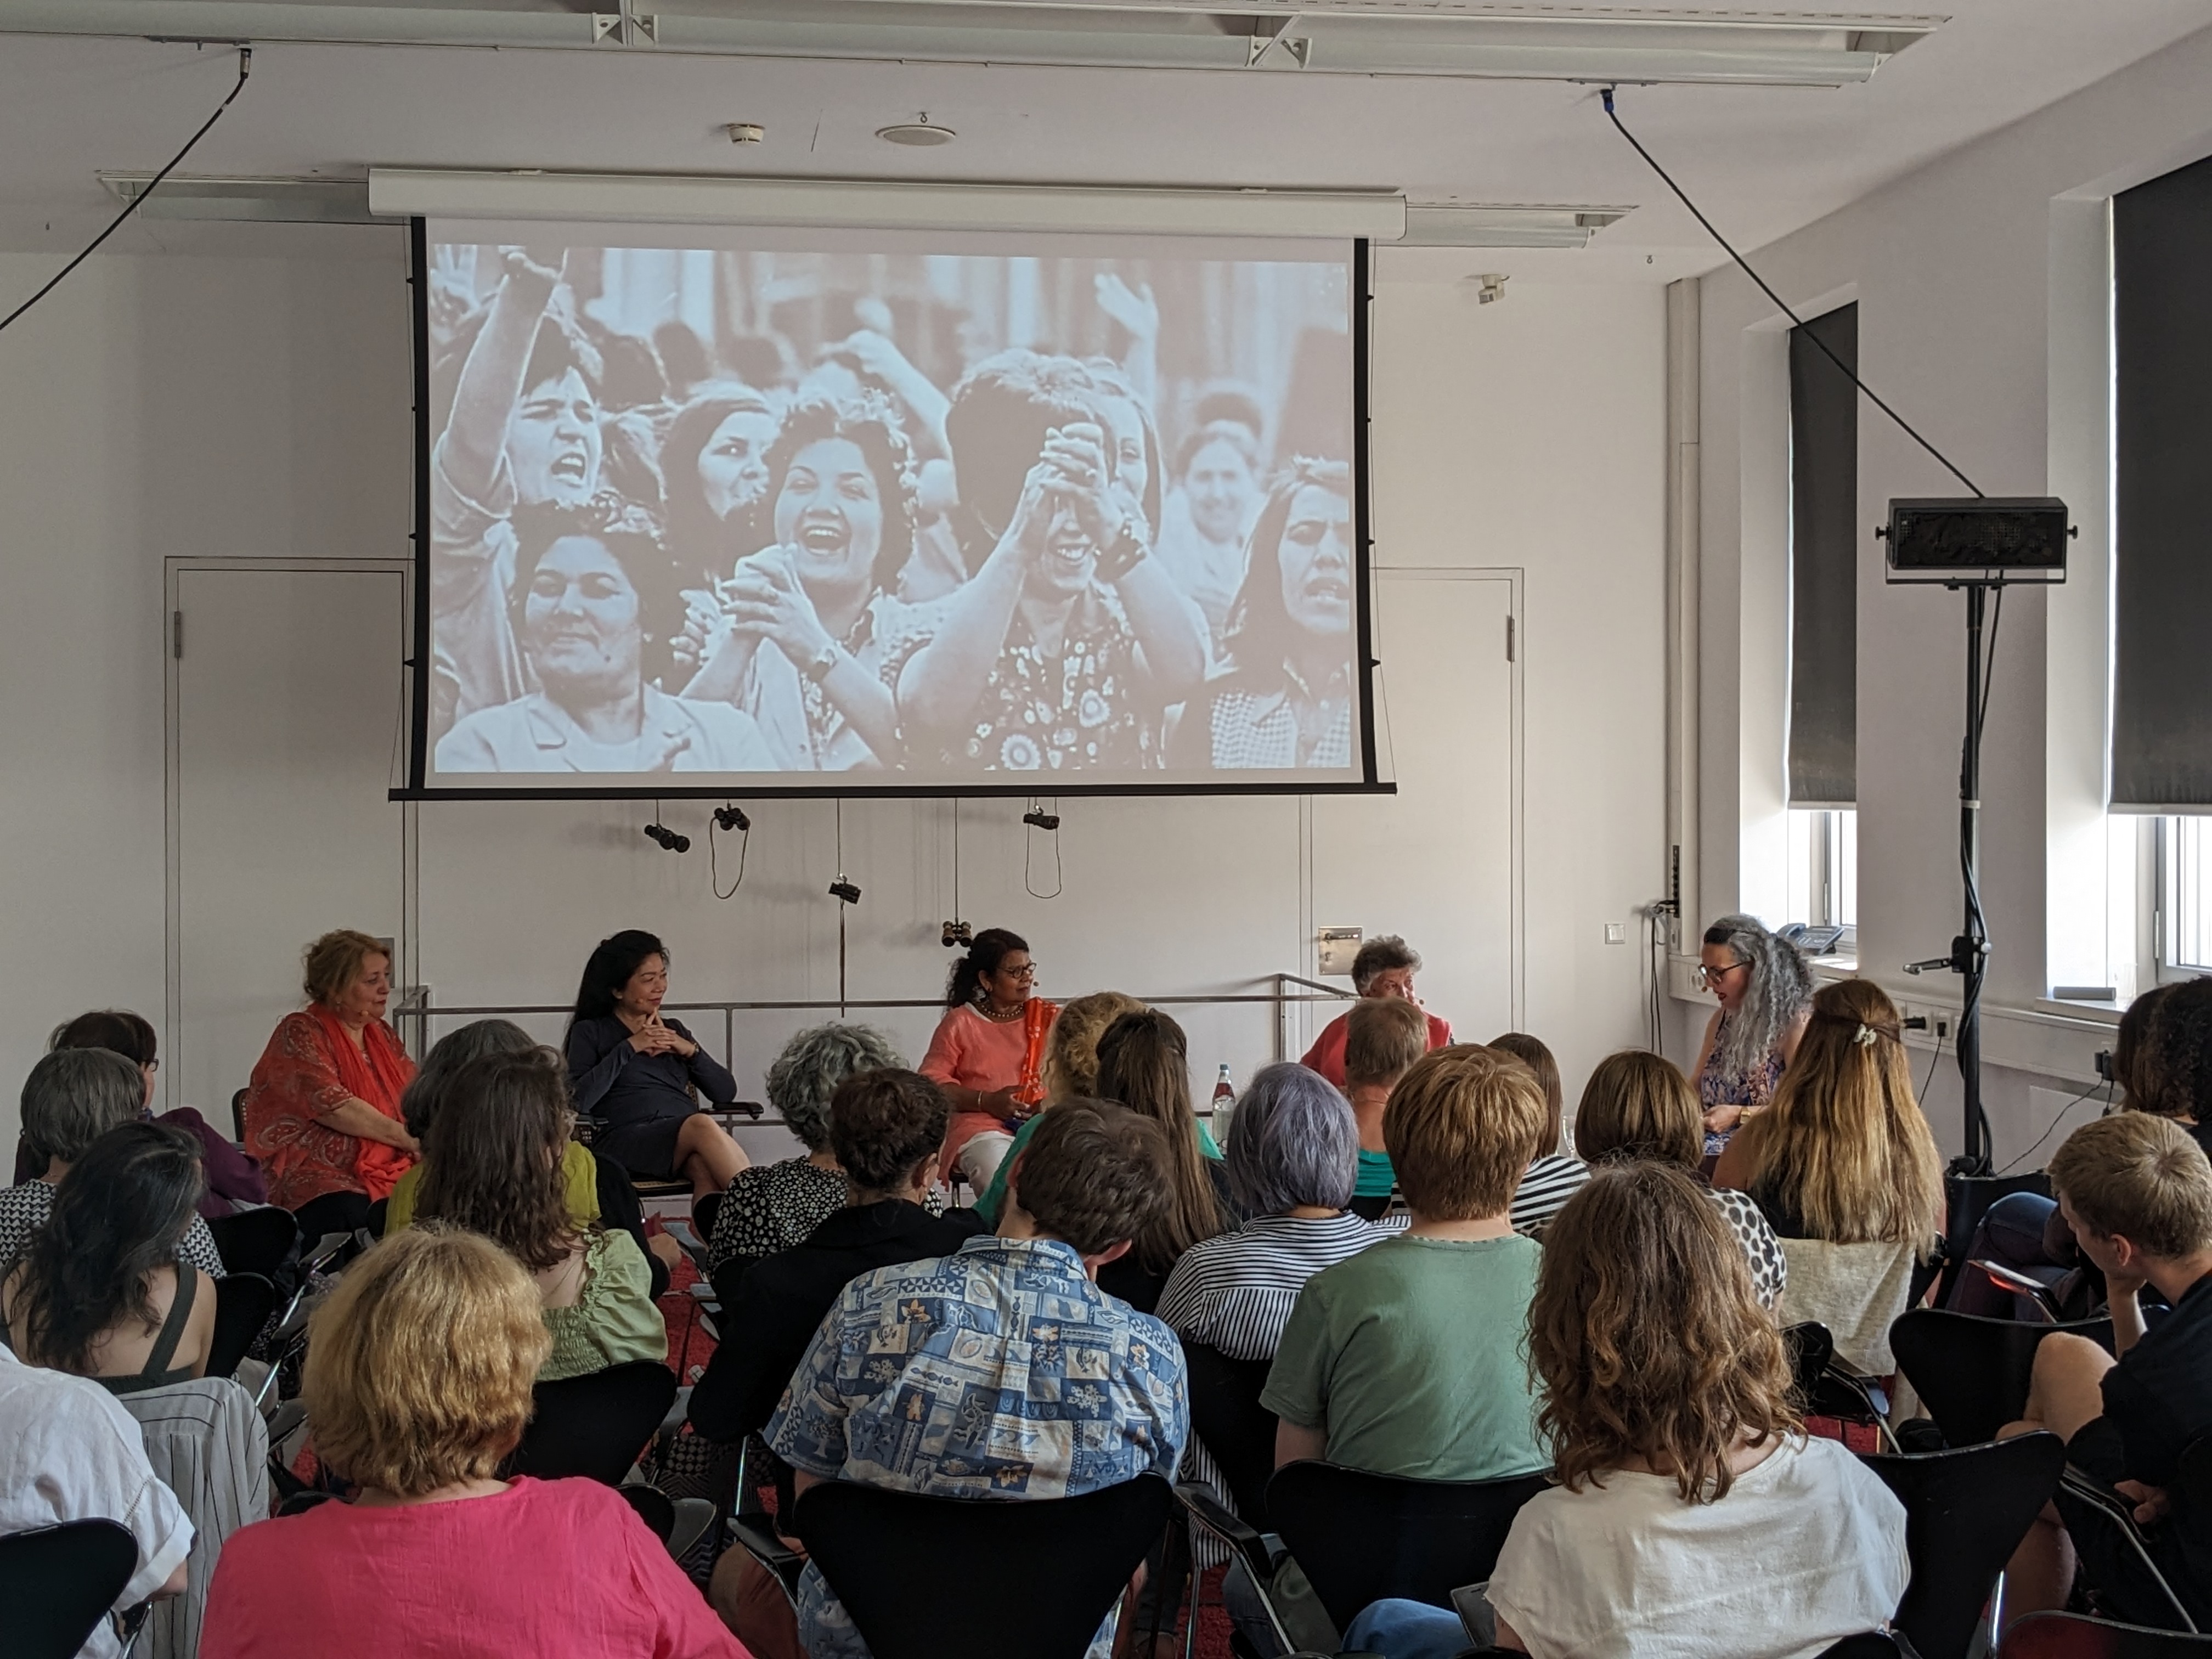 Talk at the Bundeskunsthalle "Give me the good life". Around 40 members of the audience listened to the stories of the former migrant workers. On the screen: a still from the film "Pierburg. Their struggle is our struggle. Photo: DOMiD Archive, Cologne